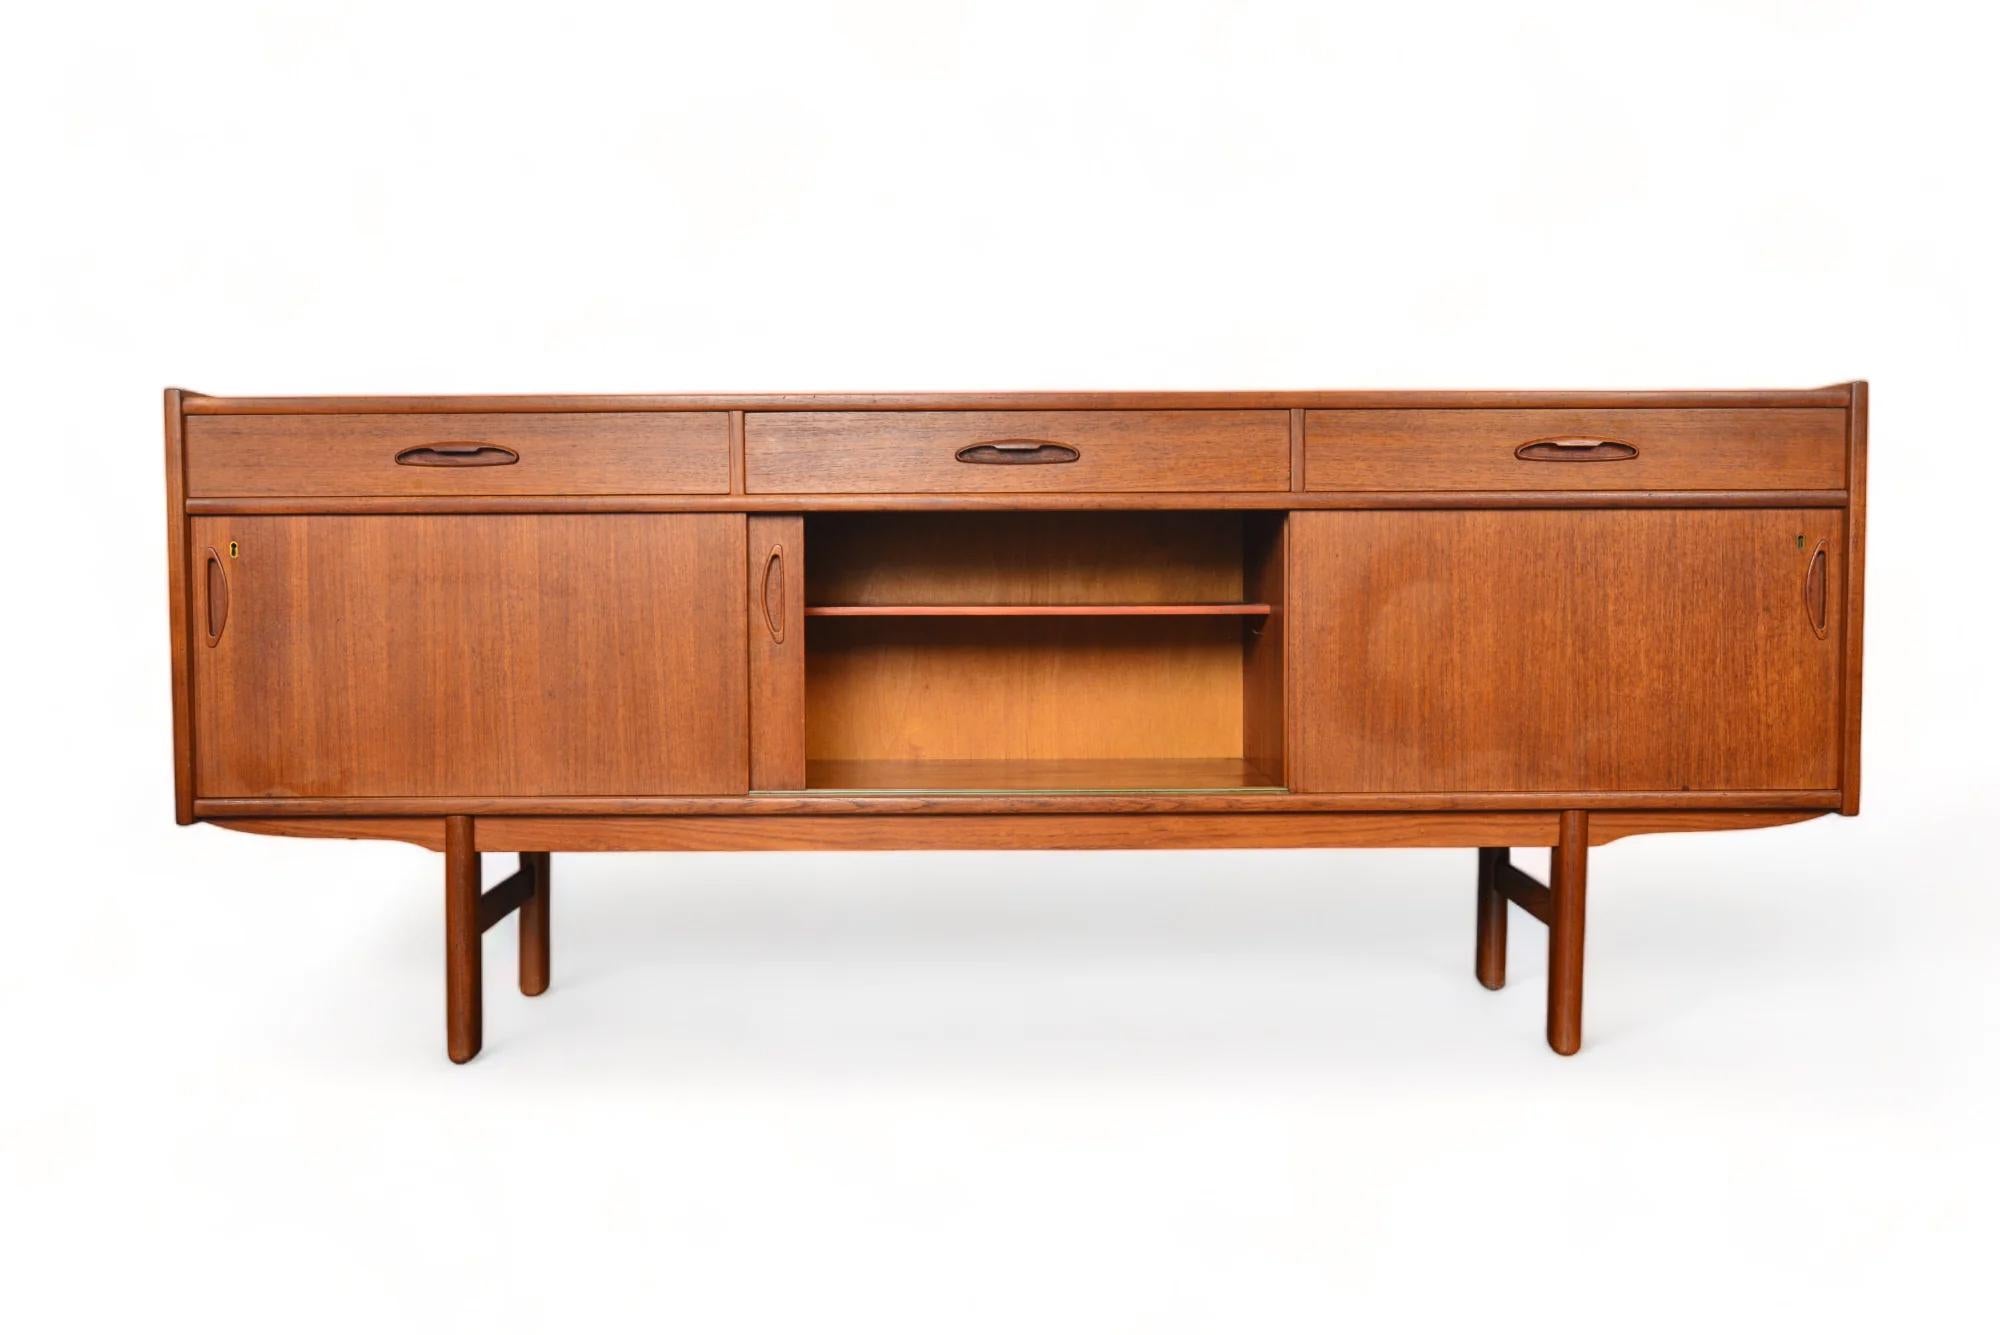 Danish Teak Credenza With Sliding And Locking Doors In Good Condition For Sale In Berkeley, CA